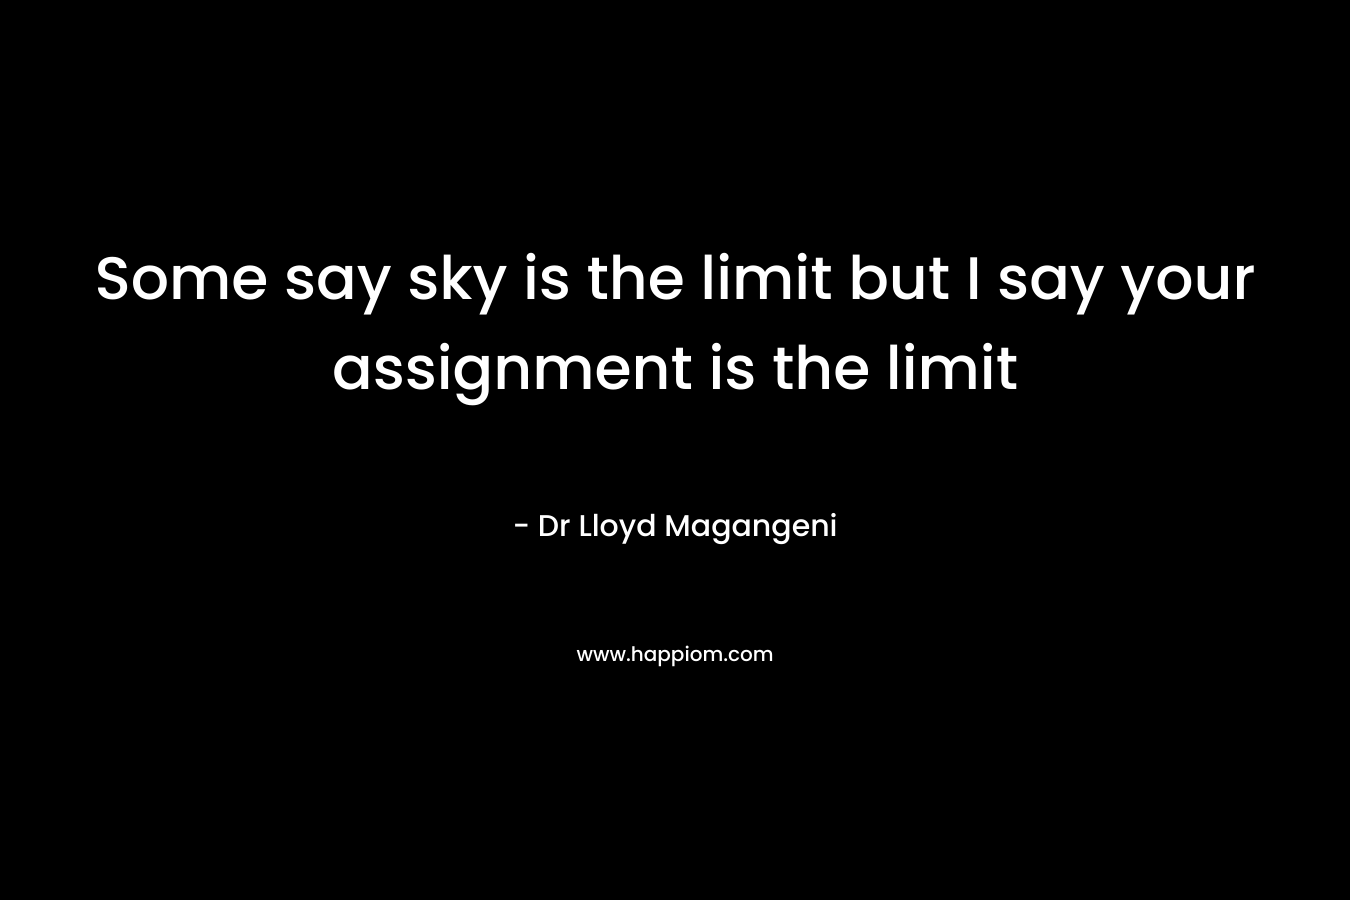 Some say sky is the limit but I say your assignment is the limit